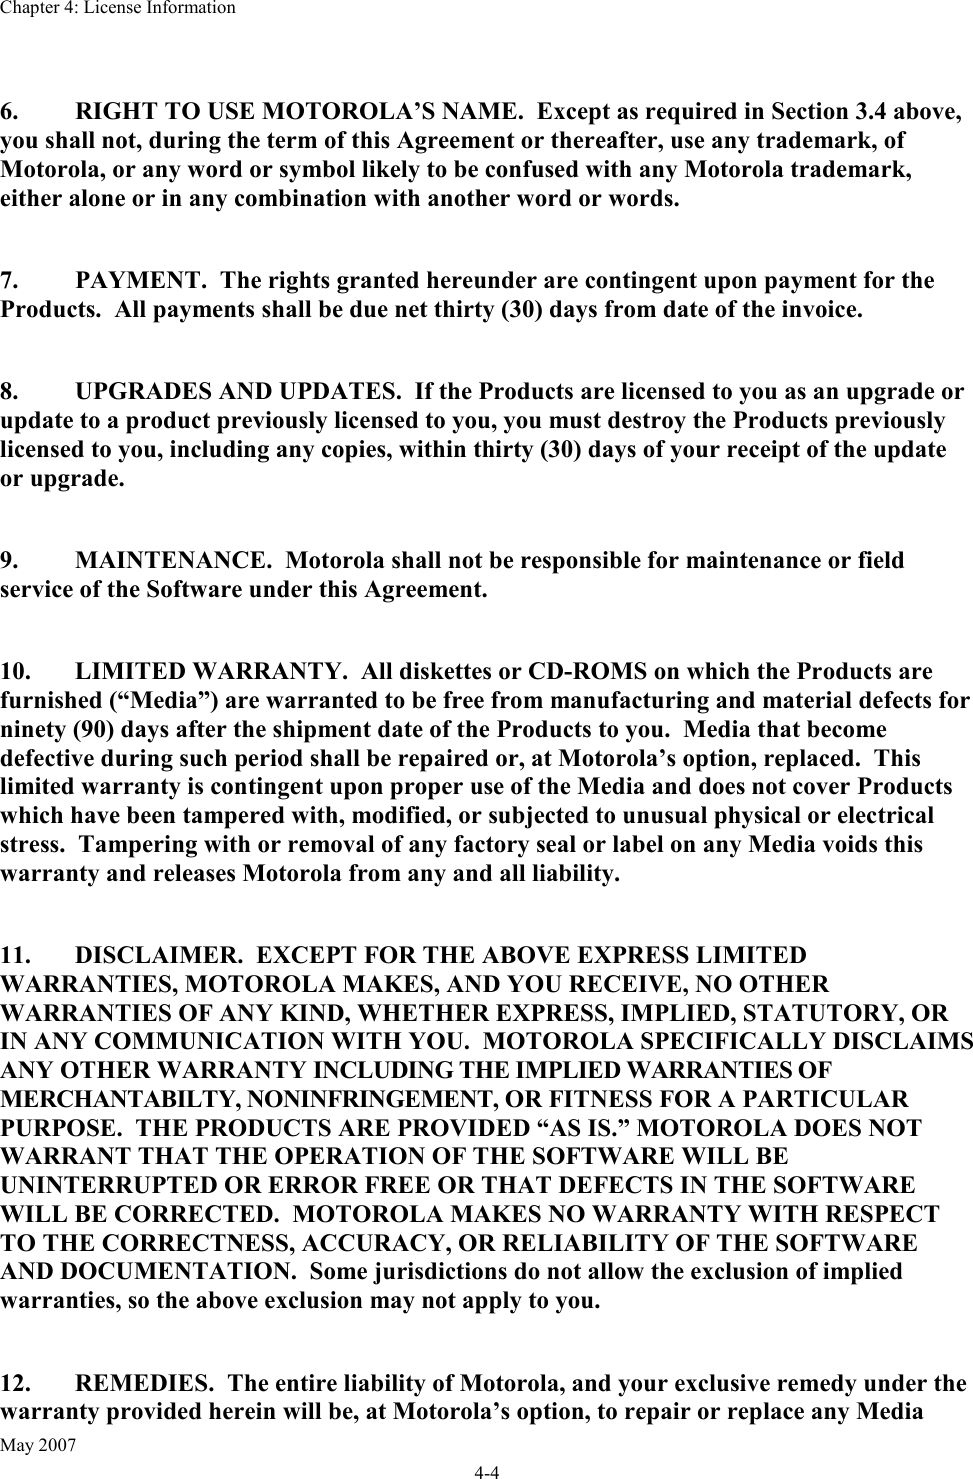 Chapter 4: License Information May 2007 4-4  6.  RIGHT TO USE MOTOROLA’S NAME.  Except as required in Section 3.4 above, you shall not, during the term of this Agreement or thereafter, use any trademark, of Motorola, or any word or symbol likely to be confused with any Motorola trademark, either alone or in any combination with another word or words.  7.  PAYMENT.  The rights granted hereunder are contingent upon payment for the Products.  All payments shall be due net thirty (30) days from date of the invoice.  8.  UPGRADES AND UPDATES.  If the Products are licensed to you as an upgrade or update to a product previously licensed to you, you must destroy the Products previously licensed to you, including any copies, within thirty (30) days of your receipt of the update or upgrade.  9.  MAINTENANCE.  Motorola shall not be responsible for maintenance or field service of the Software under this Agreement.  10.  LIMITED WARRANTY.  All diskettes or CD-ROMS on which the Products are furnished (“Media”) are warranted to be free from manufacturing and material defects for ninety (90) days after the shipment date of the Products to you.  Media that become defective during such period shall be repaired or, at Motorola’s option, replaced.  This limited warranty is contingent upon proper use of the Media and does not cover Products which have been tampered with, modified, or subjected to unusual physical or electrical stress.  Tampering with or removal of any factory seal or label on any Media voids this warranty and releases Motorola from any and all liability.  11.  DISCLAIMER.  EXCEPT FOR THE ABOVE EXPRESS LIMITED WARRANTIES, MOTOROLA MAKES, AND YOU RECEIVE, NO OTHER WARRANTIES OF ANY KIND, WHETHER EXPRESS, IMPLIED, STATUTORY, OR IN ANY COMMUNICATION WITH YOU.  MOTOROLA SPECIFICALLY DISCLAIMS ANY OTHER WARRANTY INCLUDING THE IMPLIED WARRANTIES OF MERCHANTABILTY, NONINFRINGEMENT, OR FITNESS FOR A PARTICULAR PURPOSE.  THE PRODUCTS ARE PROVIDED “AS IS.” MOTOROLA DOES NOT WARRANT THAT THE OPERATION OF THE SOFTWARE WILL BE UNINTERRUPTED OR ERROR FREE OR THAT DEFECTS IN THE SOFTWARE WILL BE CORRECTED.  MOTOROLA MAKES NO WARRANTY WITH RESPECT TO THE CORRECTNESS, ACCURACY, OR RELIABILITY OF THE SOFTWARE AND DOCUMENTATION.  Some jurisdictions do not allow the exclusion of implied warranties, so the above exclusion may not apply to you.   12.  REMEDIES.  The entire liability of Motorola, and your exclusive remedy under the warranty provided herein will be, at Motorola’s option, to repair or replace any Media 